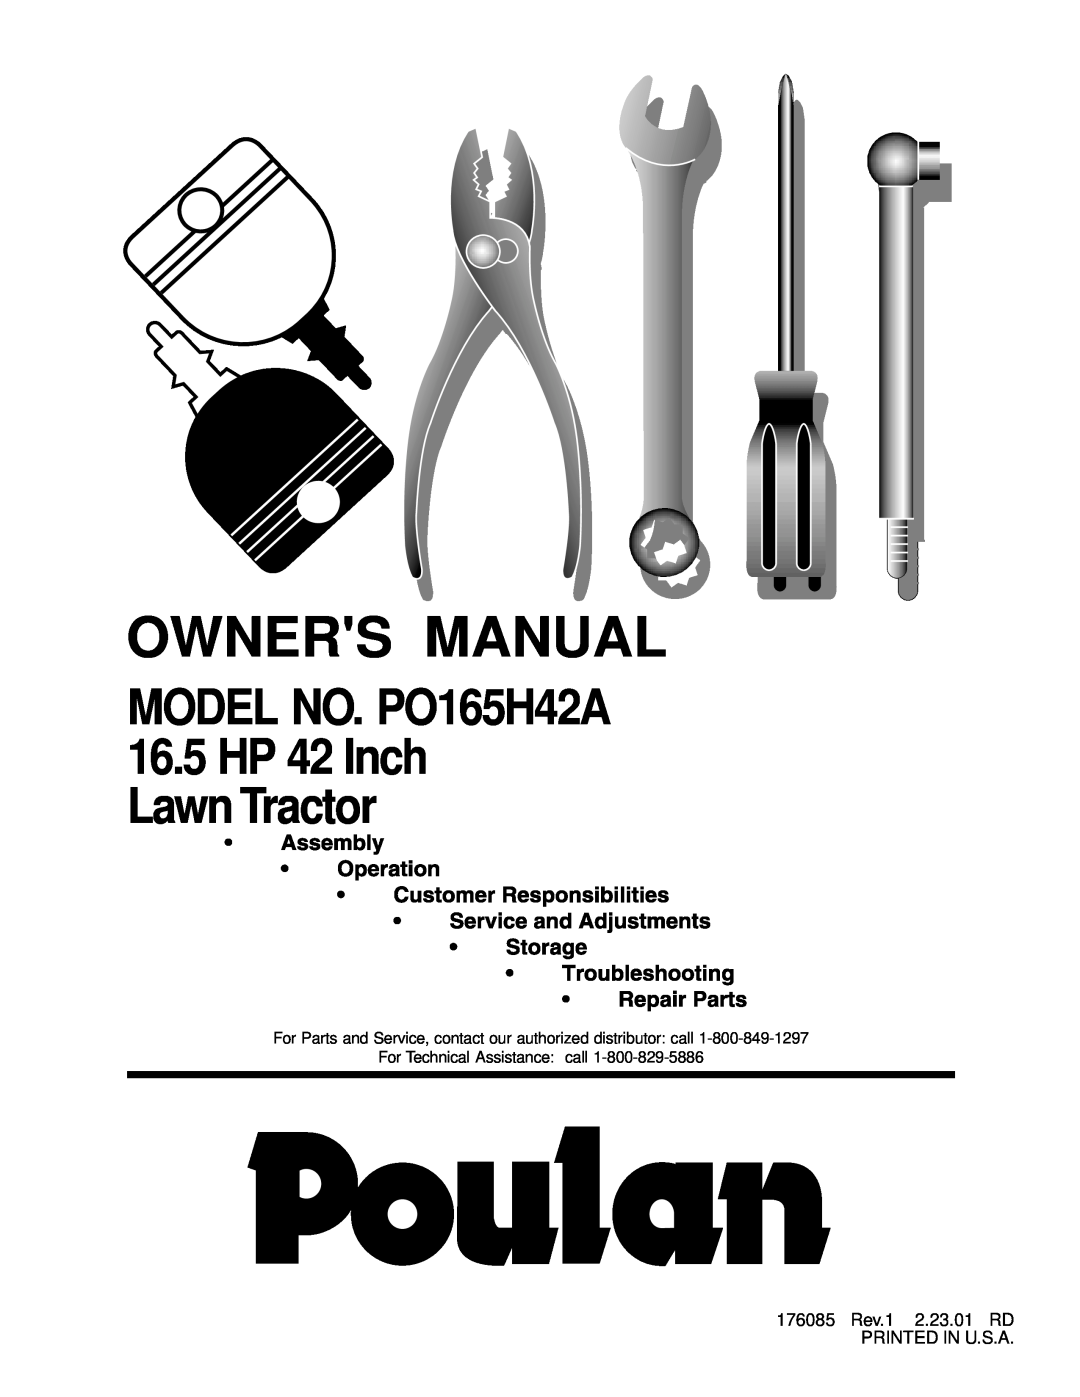 Poulan 176085 owner manual MODEL NO. PO165H42A 16.5 HP 42 Inch Lawn Tractor 